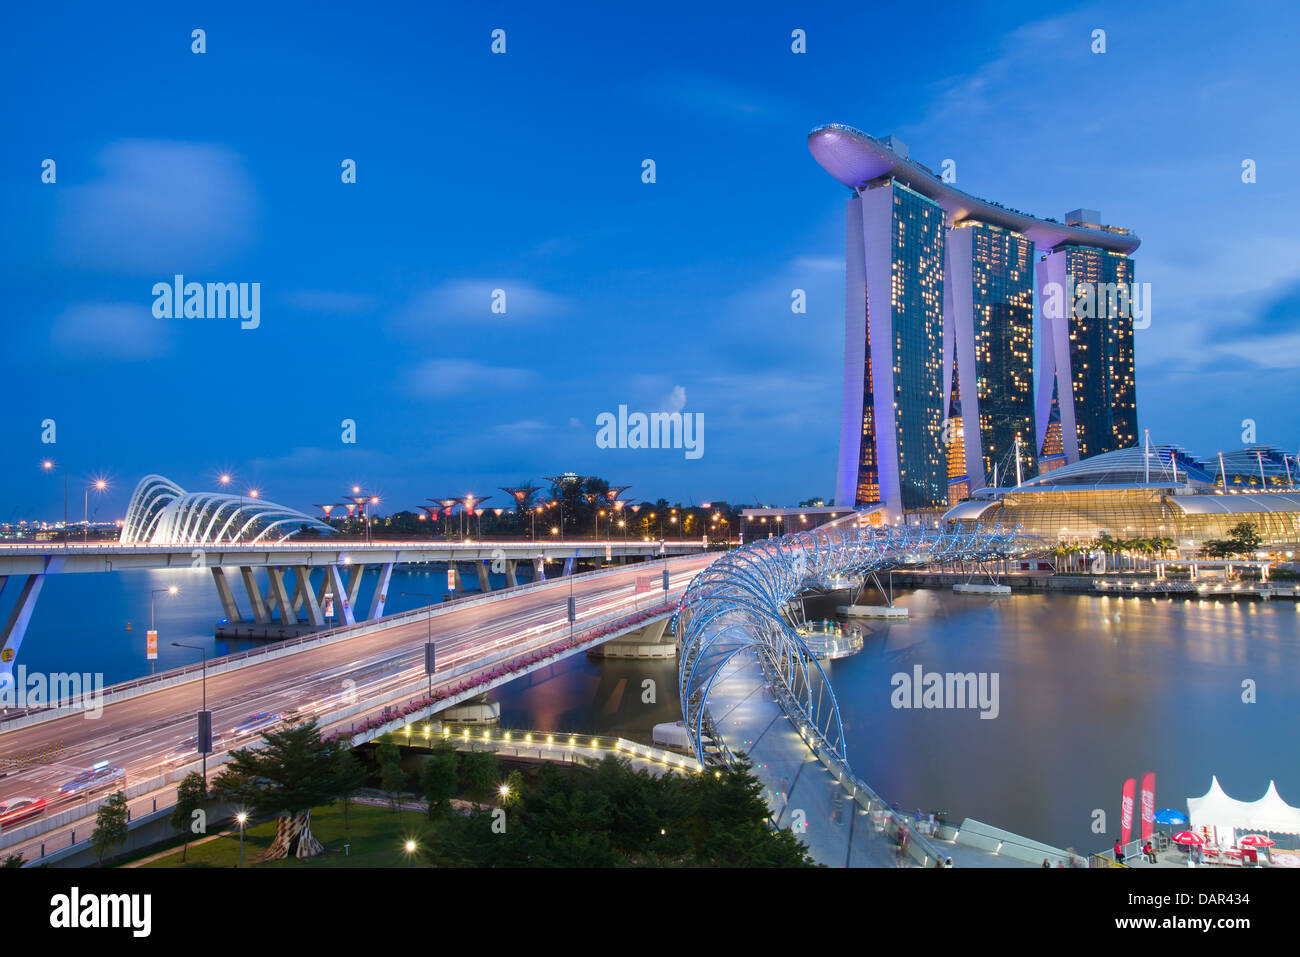 Singapour Marina Bay Sands Casino and Resort Banque D'Images